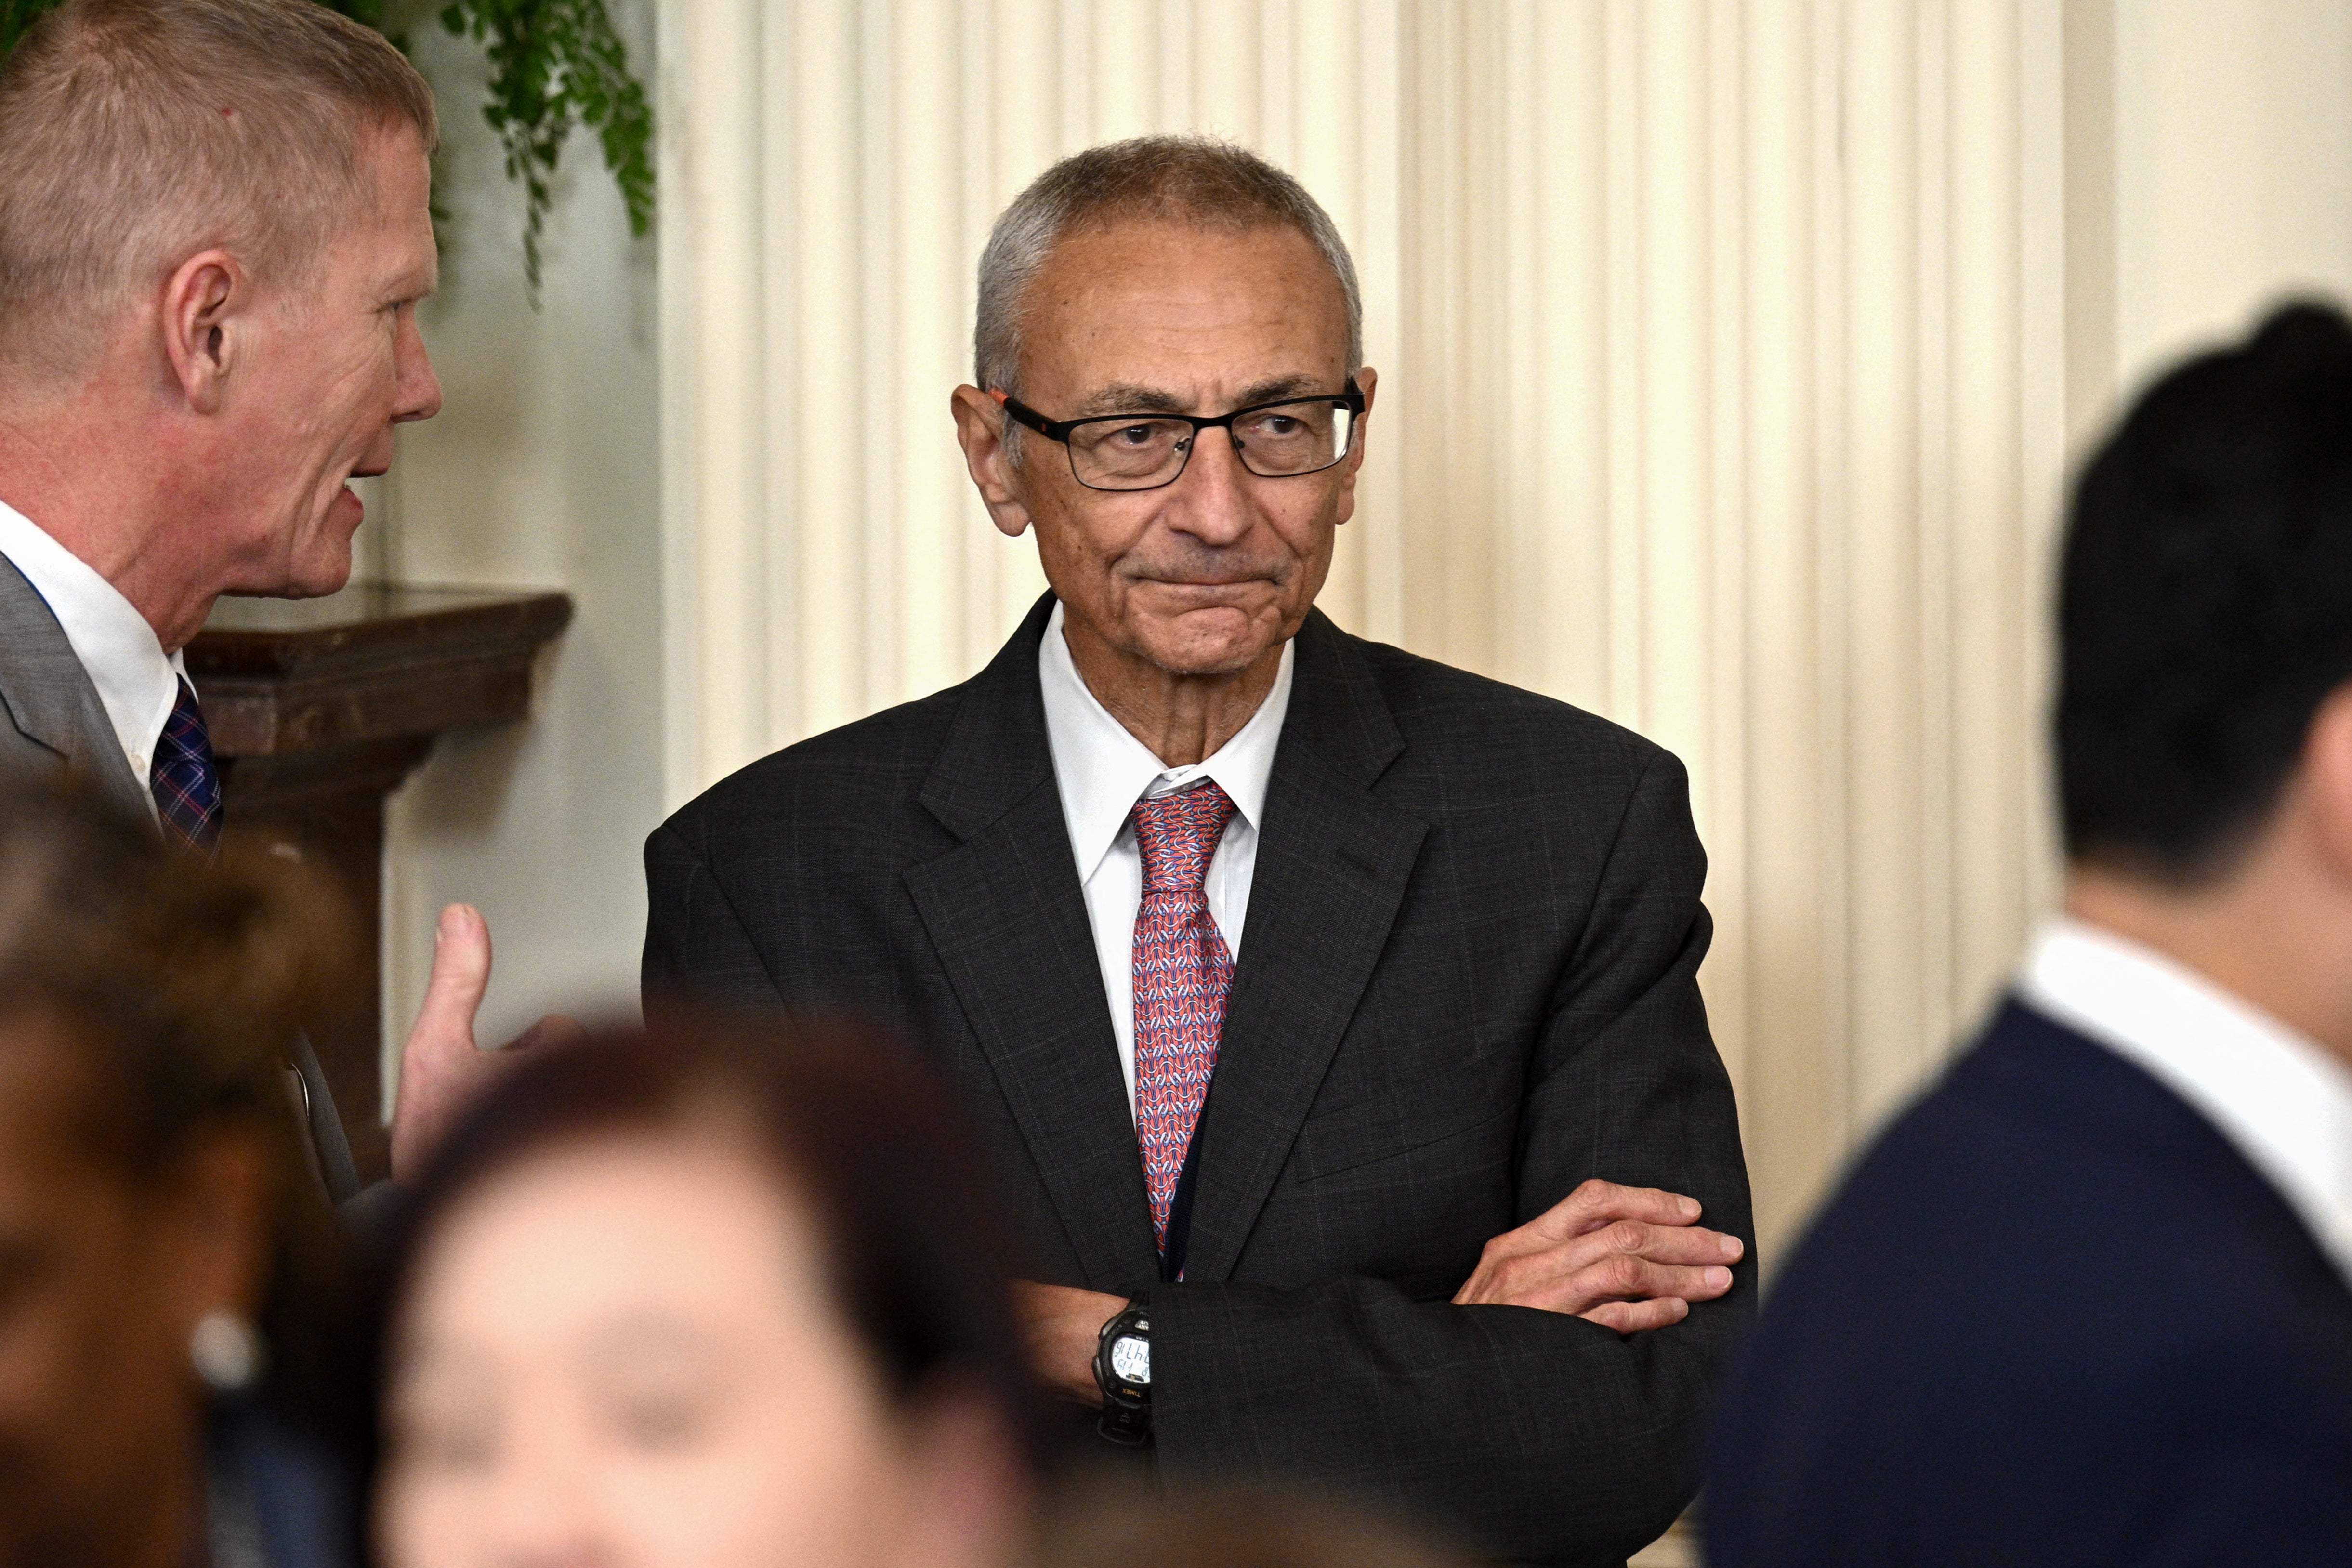 John Podesta, Senior Advisor to Joe Biden, is being elevated to the role of US presidential envoy for climate